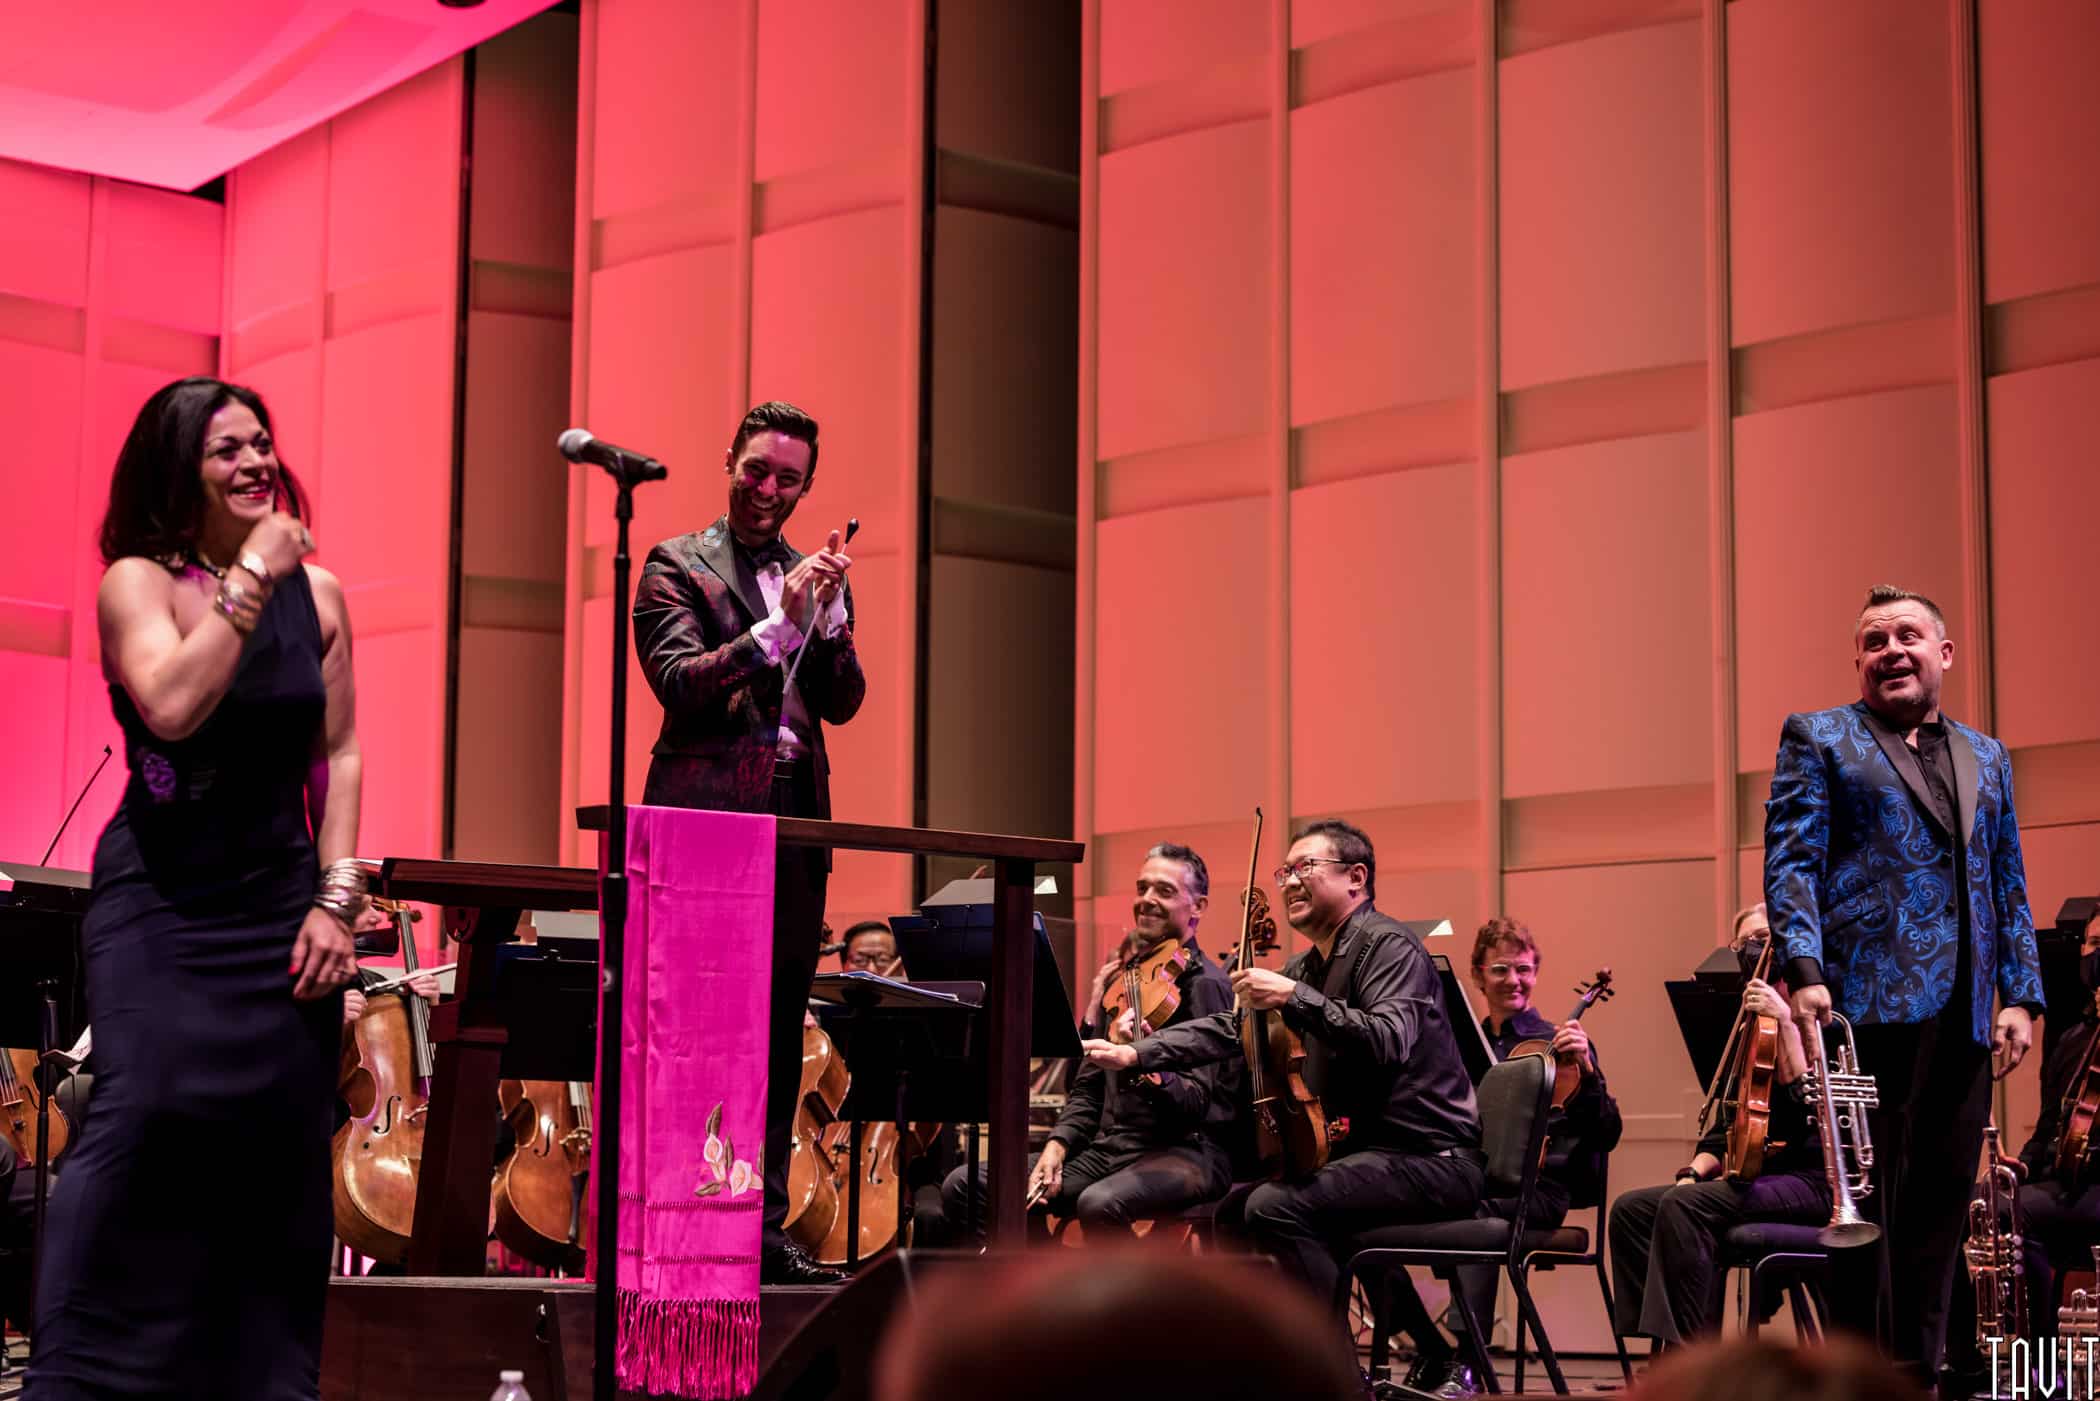 Conductor with the Phoenix Symphony and performers on stage